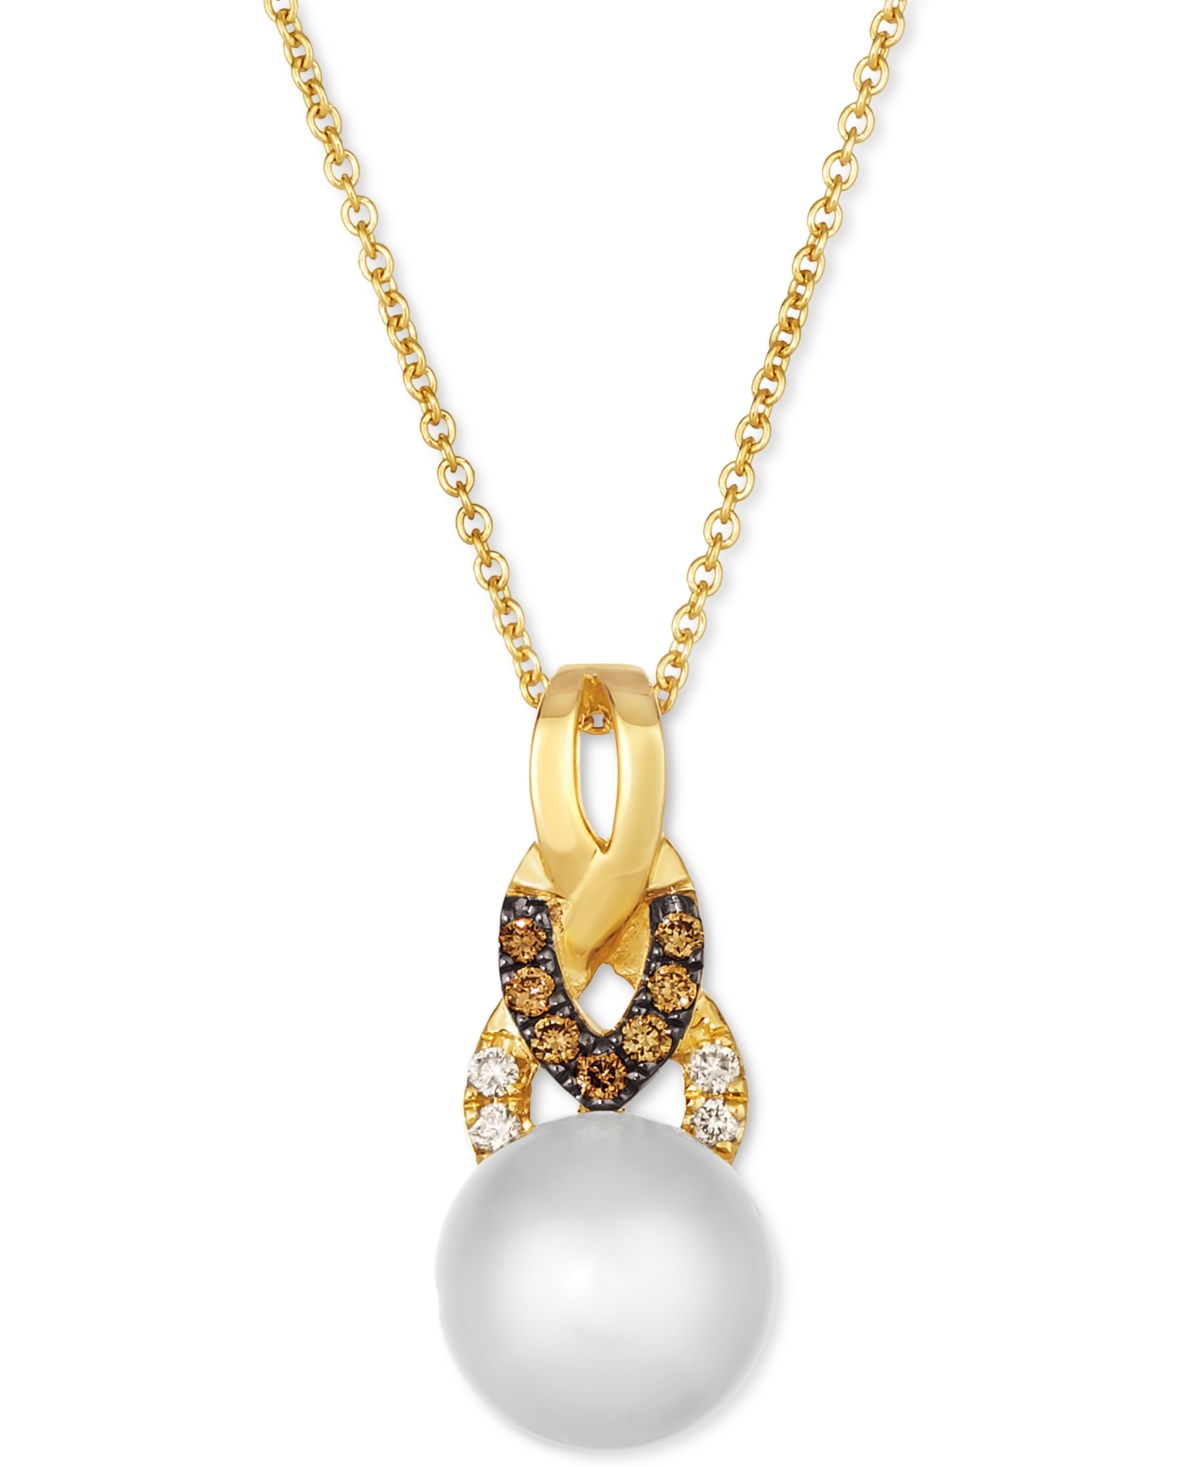 Vanilla Pearl (8mm) & Diamond (1/10 ct. t.w.) Adjustable Pendant Necklace in 14k Gold - Yellow Gold